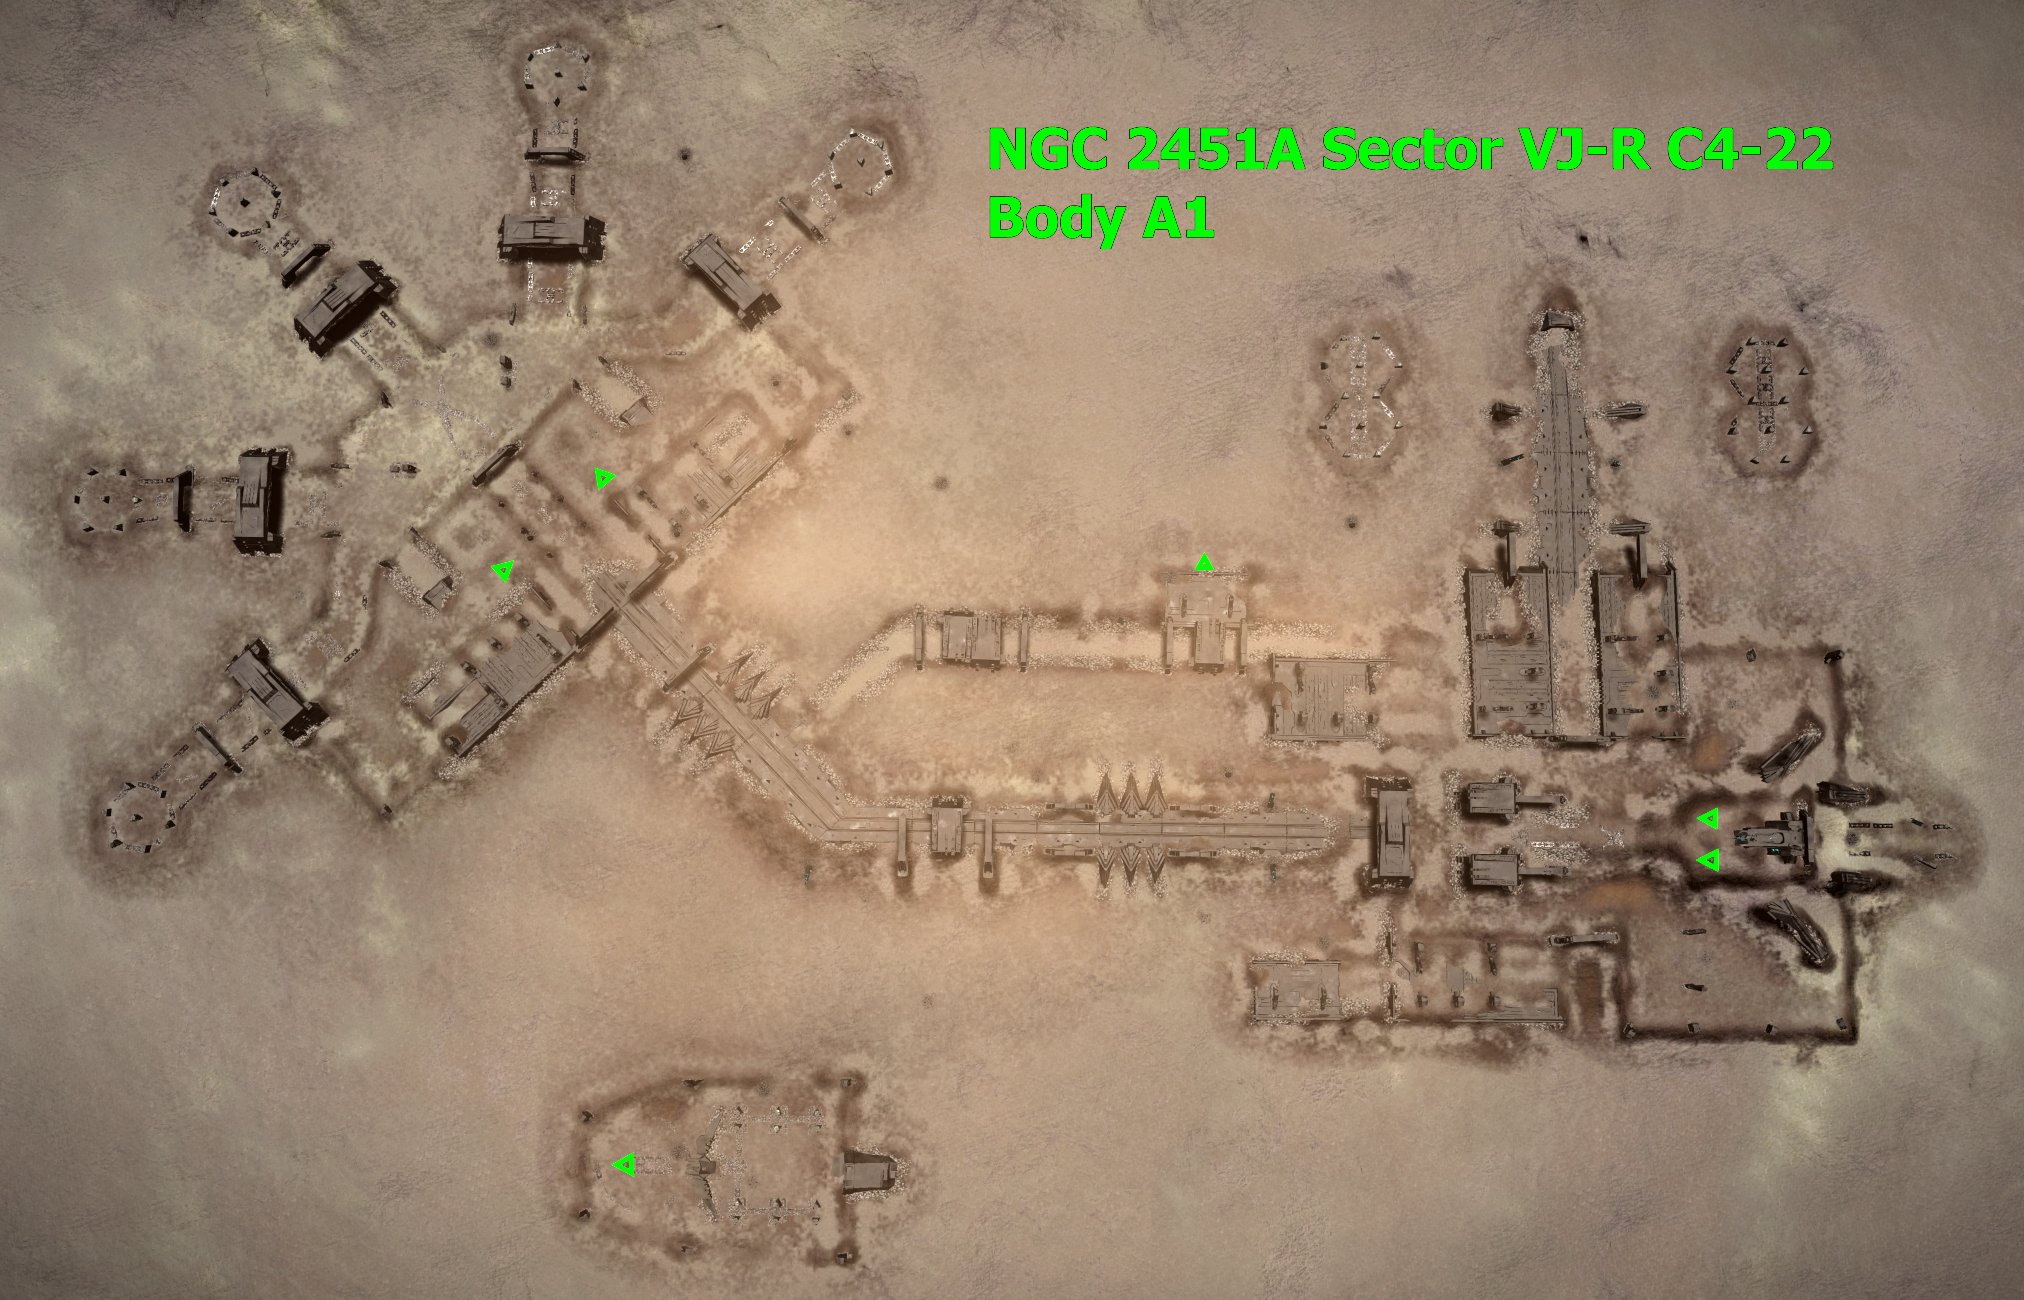 Image For Post | Want the Guardian Ship-Launched Fighters? 
Get your ship an energy weapon, stick a Point Defense on the top, and an SRV in the hold (and enough materials to synthesize additional fuel/ammo).
Go to the Guardian Beacon at NGC 2451A Sector LX-U D2-25, charge-up the three pylons on the beacon, scan the orb, and then collect the key (re-log and repeat twice more if you intend to get all 3 fighters).
Then go here (Guardian Structure at NGC 2451A Sector VJ-R C4-22 - Body A1), fight off the Sentinels, charge the Pylons, eject the key, scan the Orb, fight more sentinels and gather materials.
Repeat until you have all the Guardian Ship Blueprints you require (and all the materials/data to build the SLFs), then go find a Guardian Tech Broker.